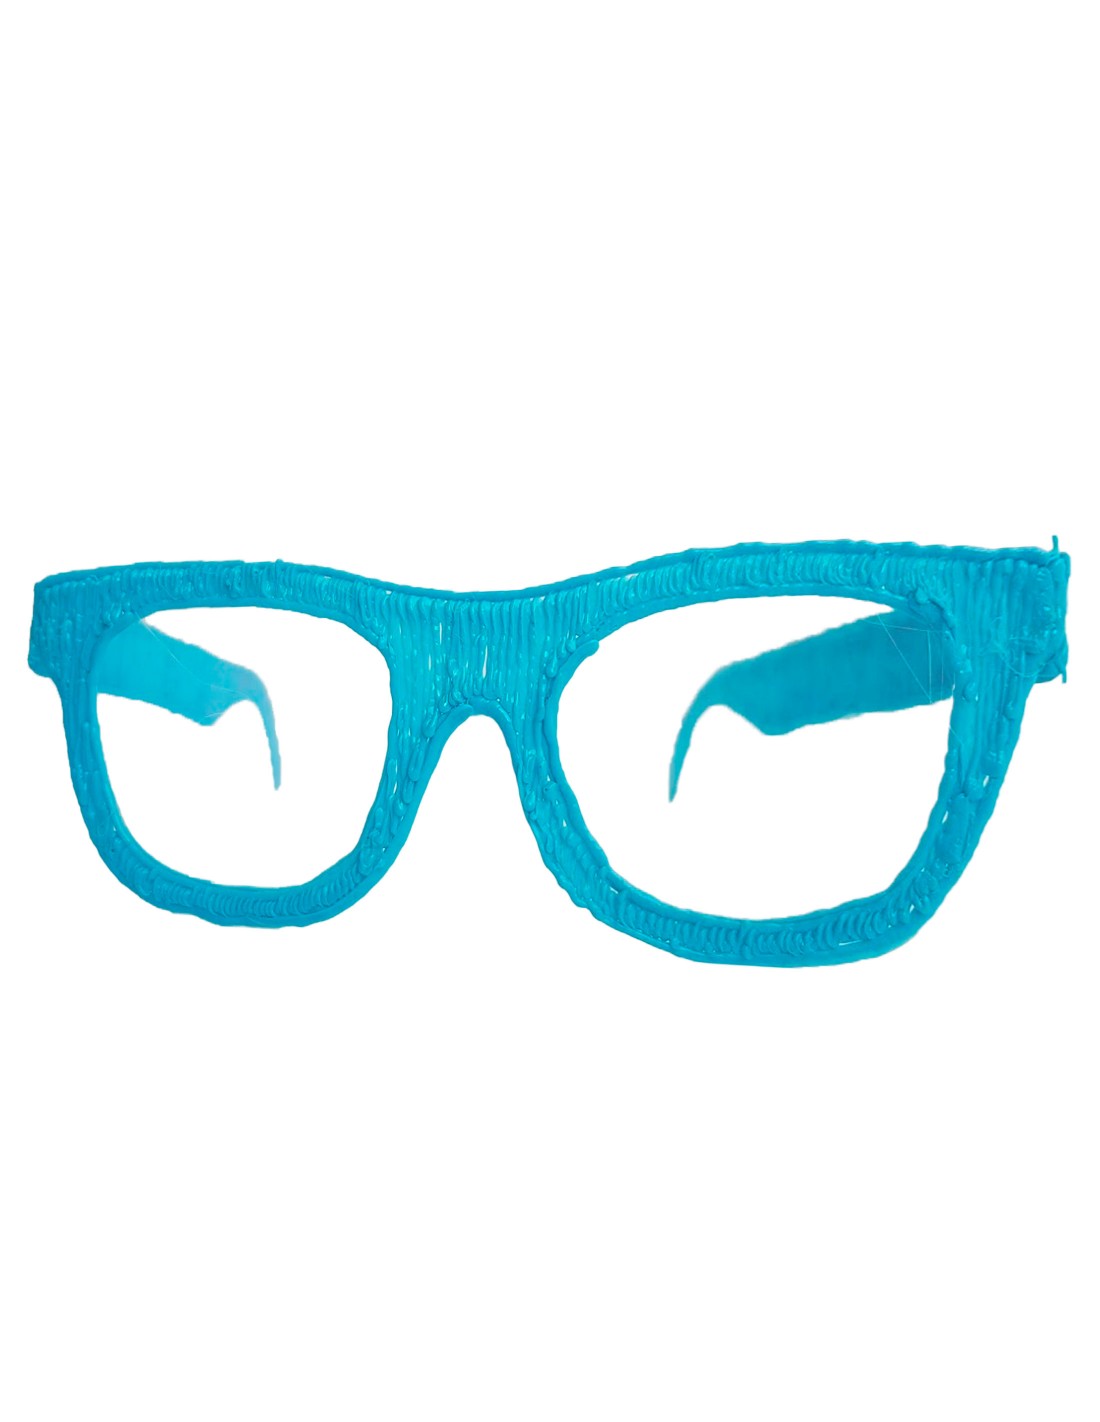 glasses-1-free-template-for-a-3d-pen